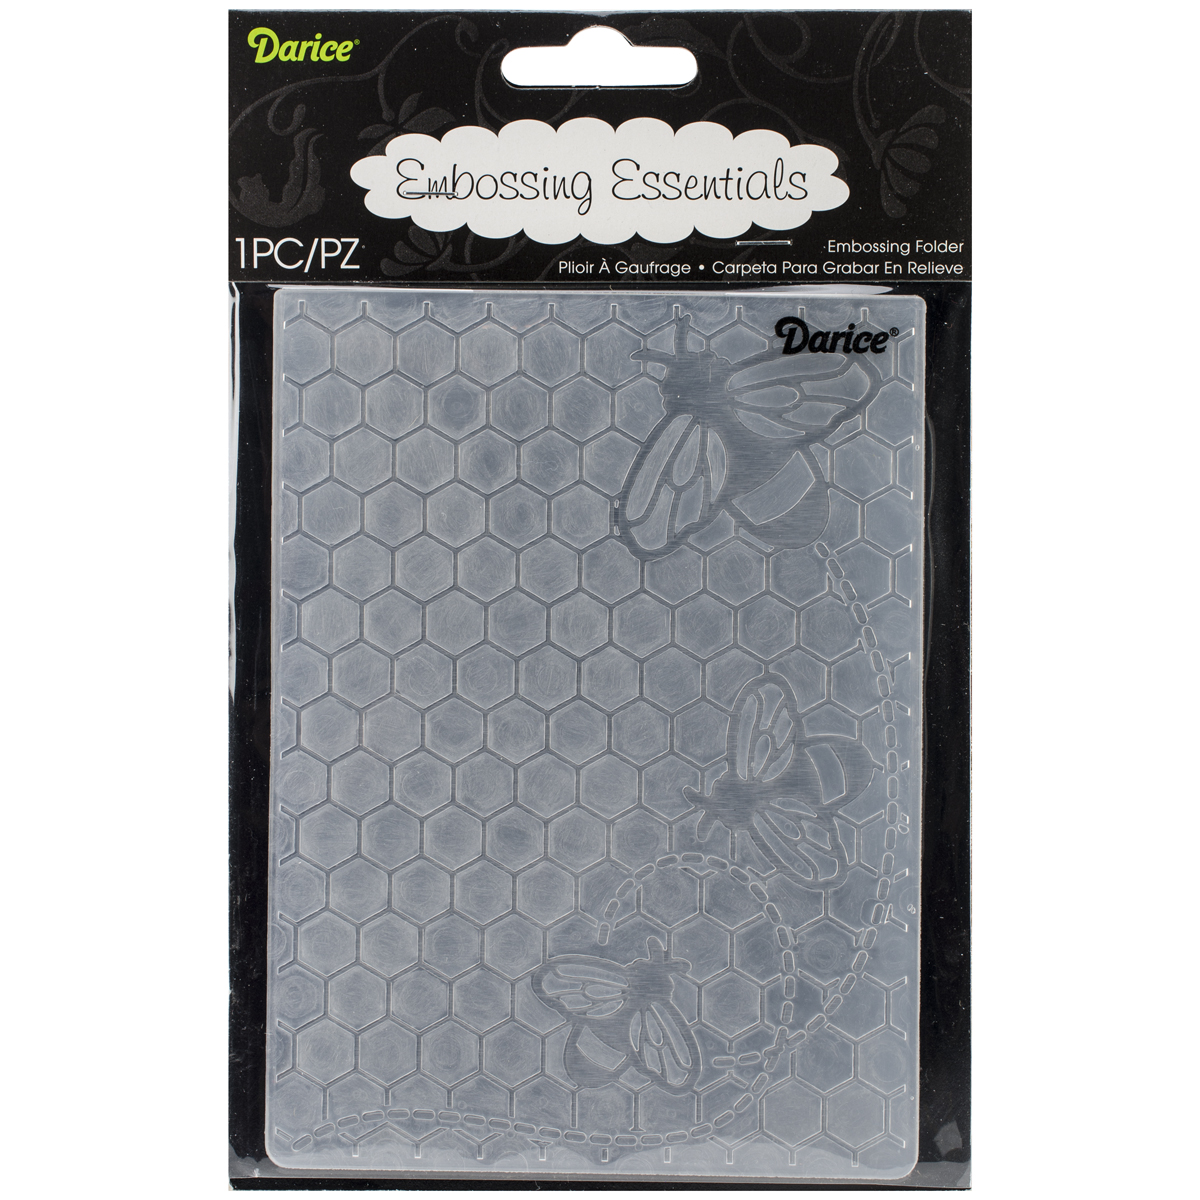 Darice Embossing Folder Bees Buzzing 4.25 X 5.75 Inches - image 1 of 1